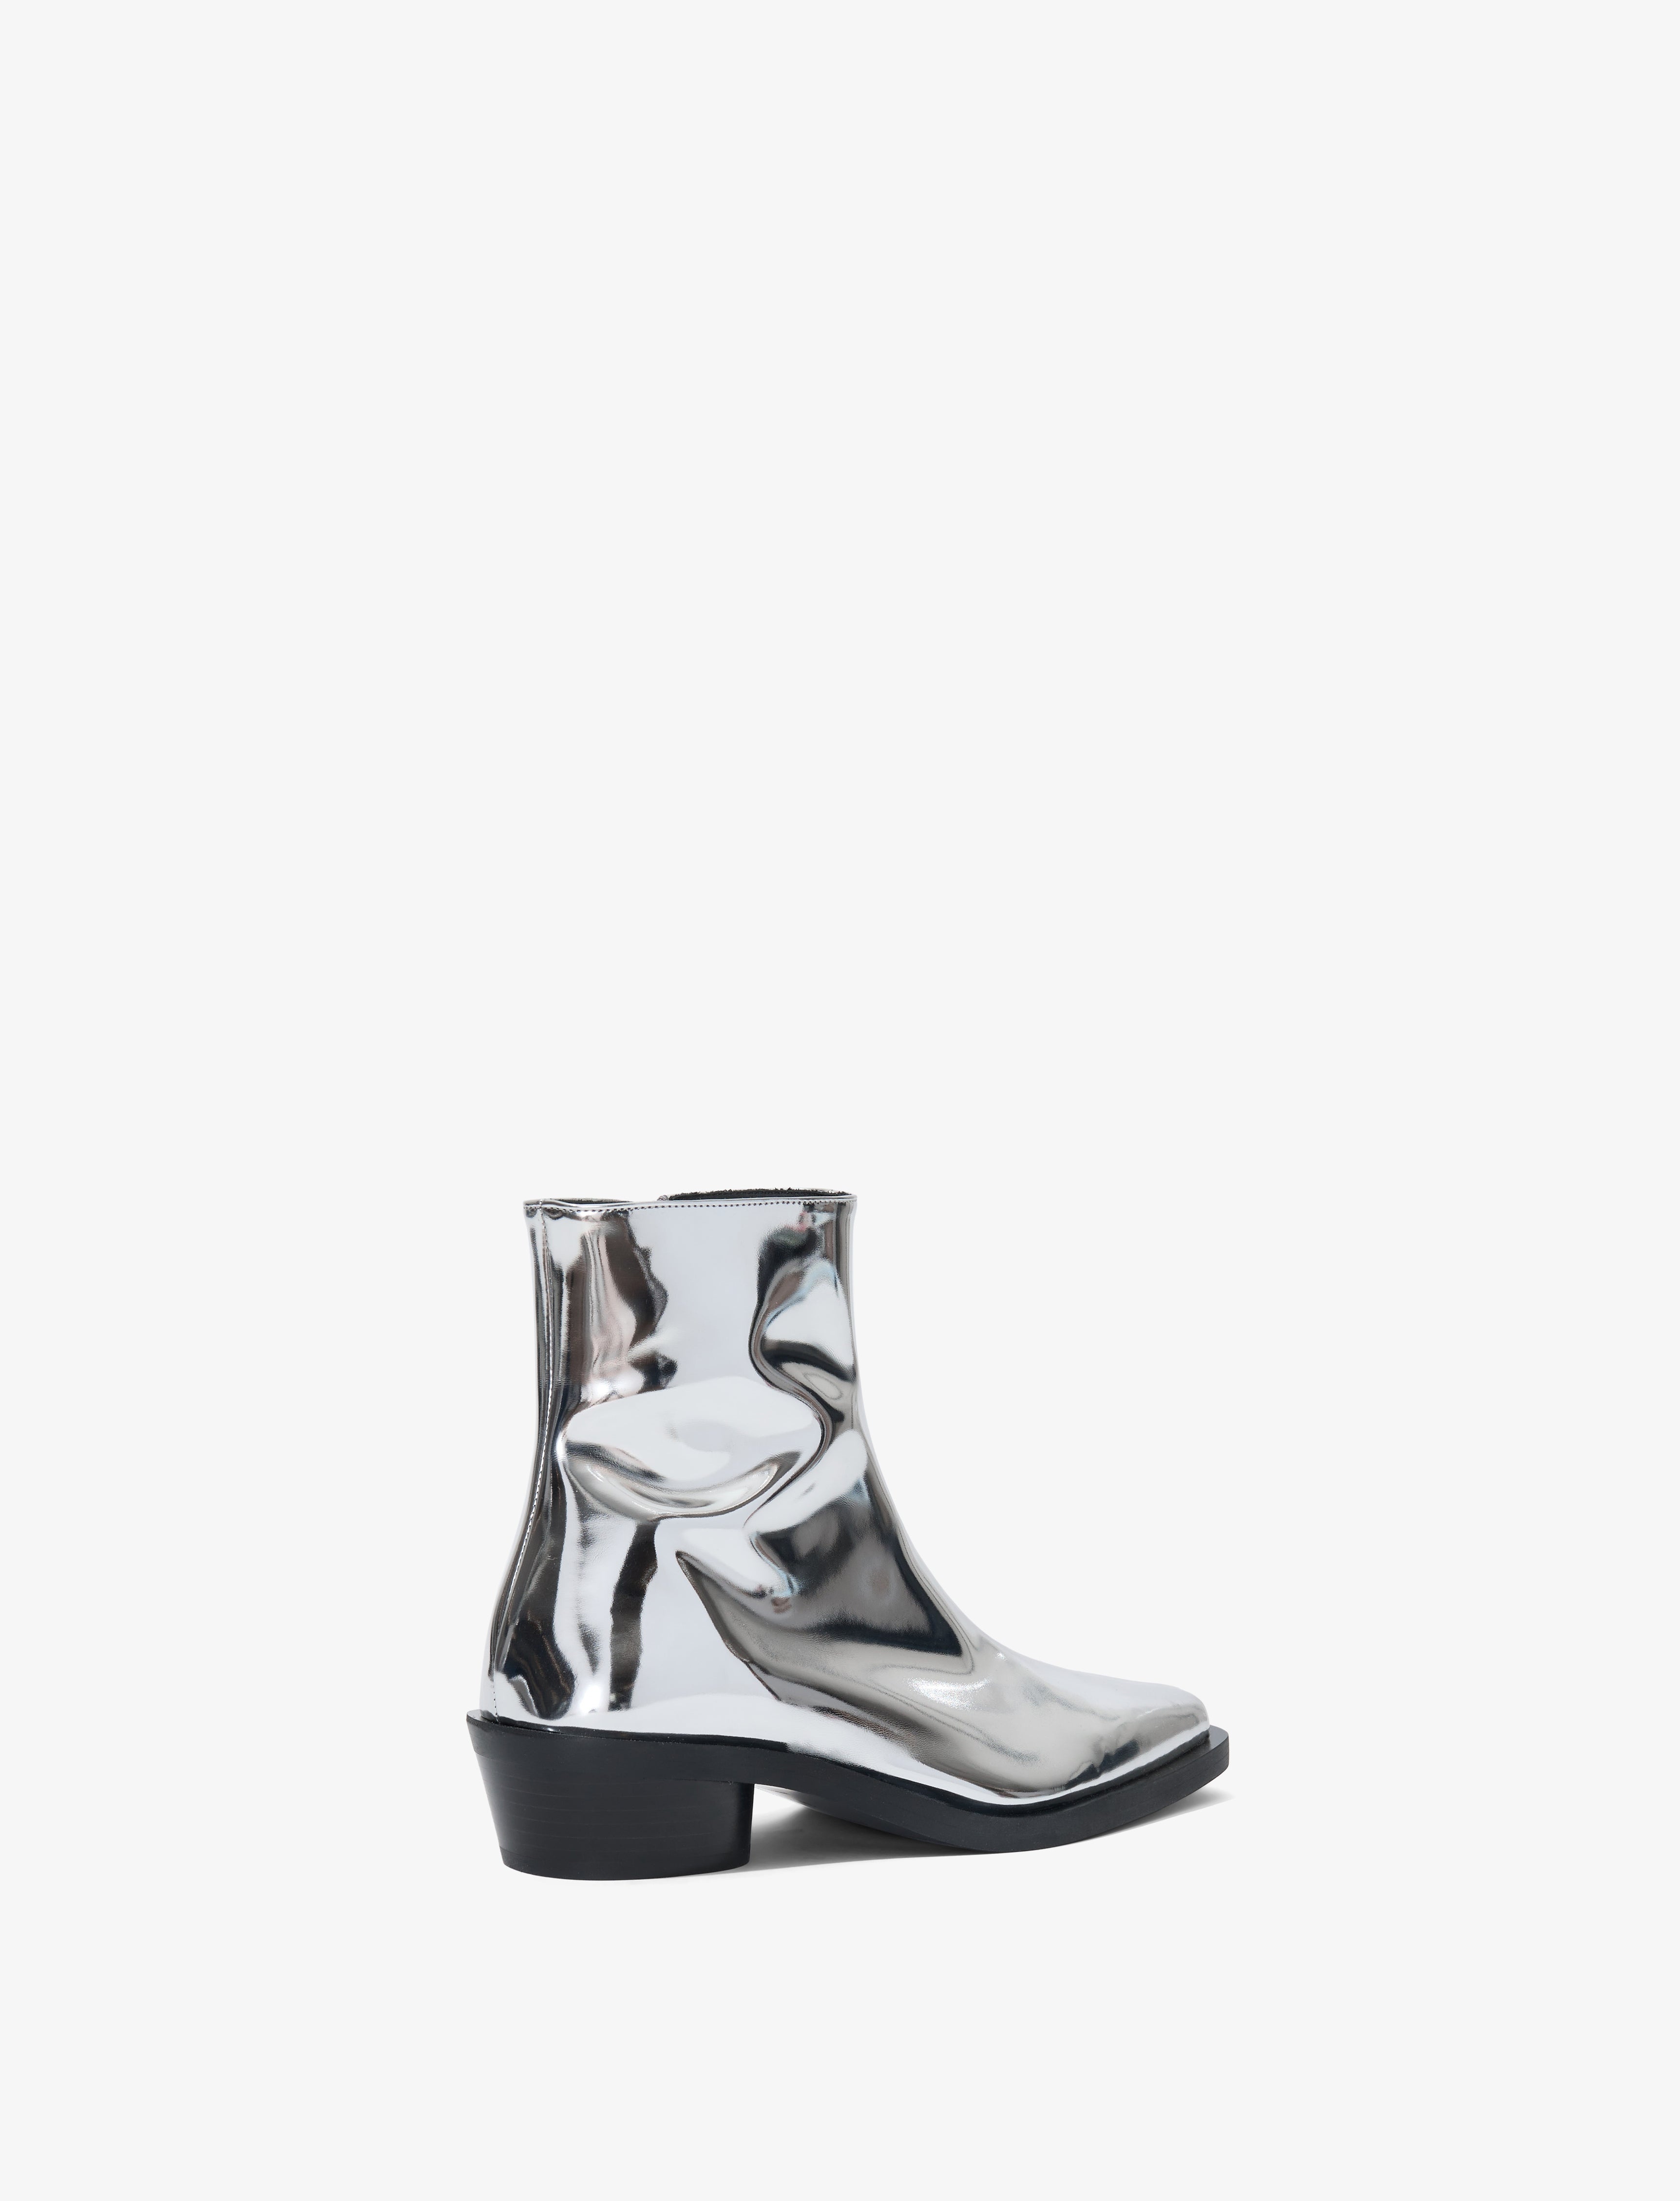 Bronco Ankle Boots in Mirrored Metallic - 3